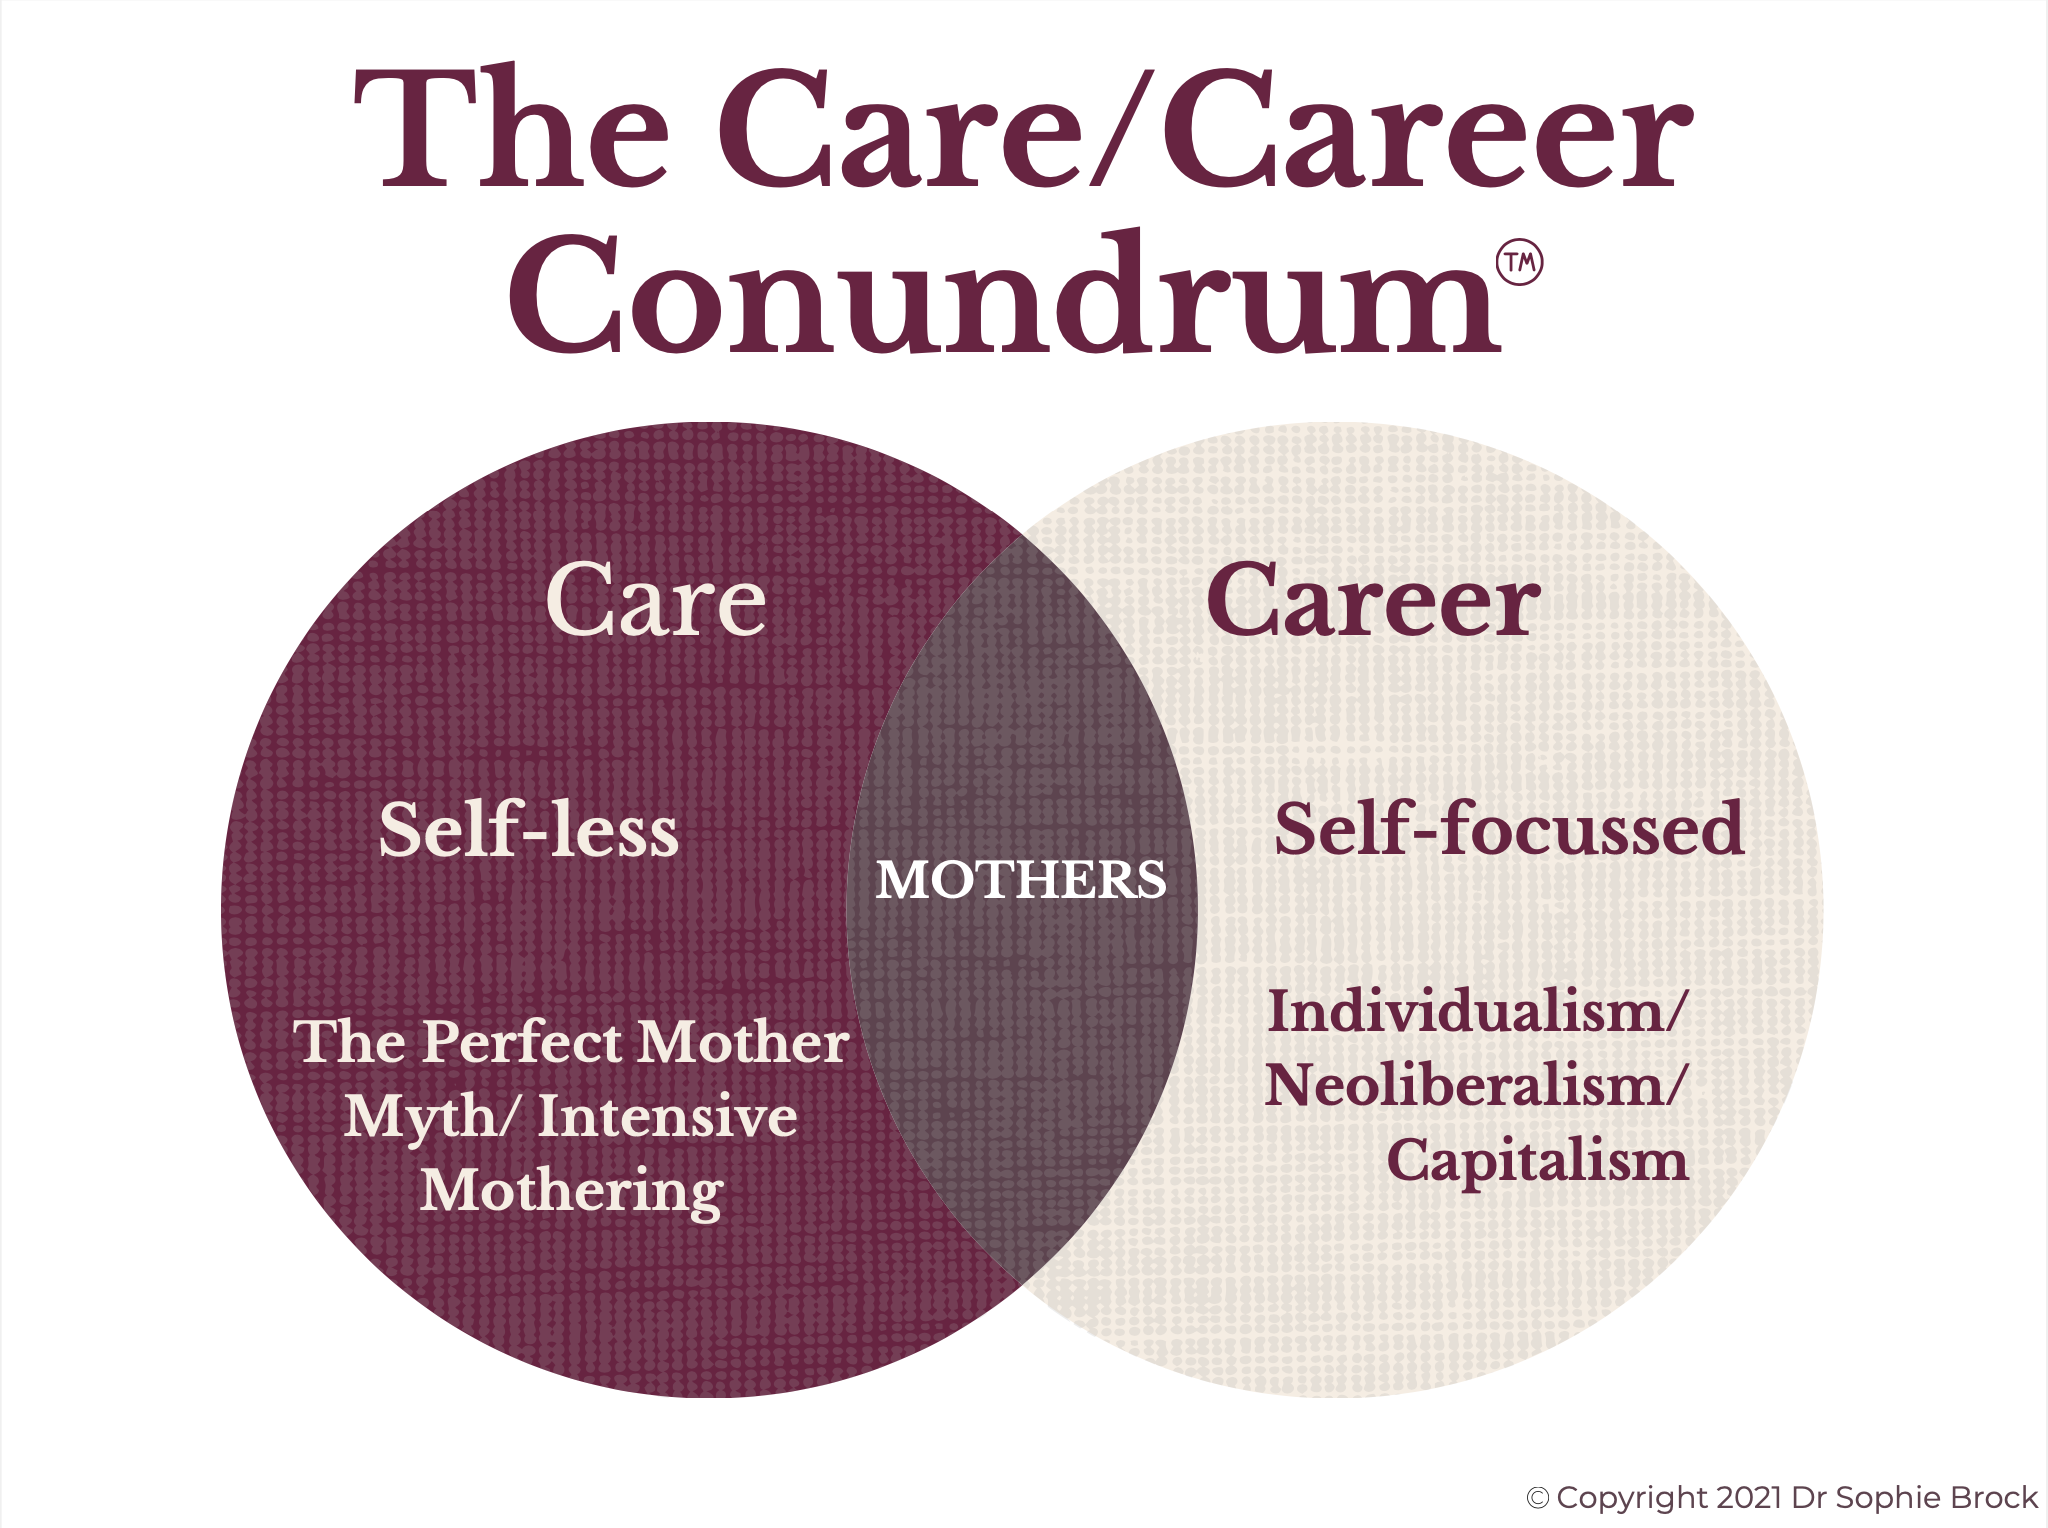 What Is The Care/Career Conundrum™ By Dr Sophie Brock?